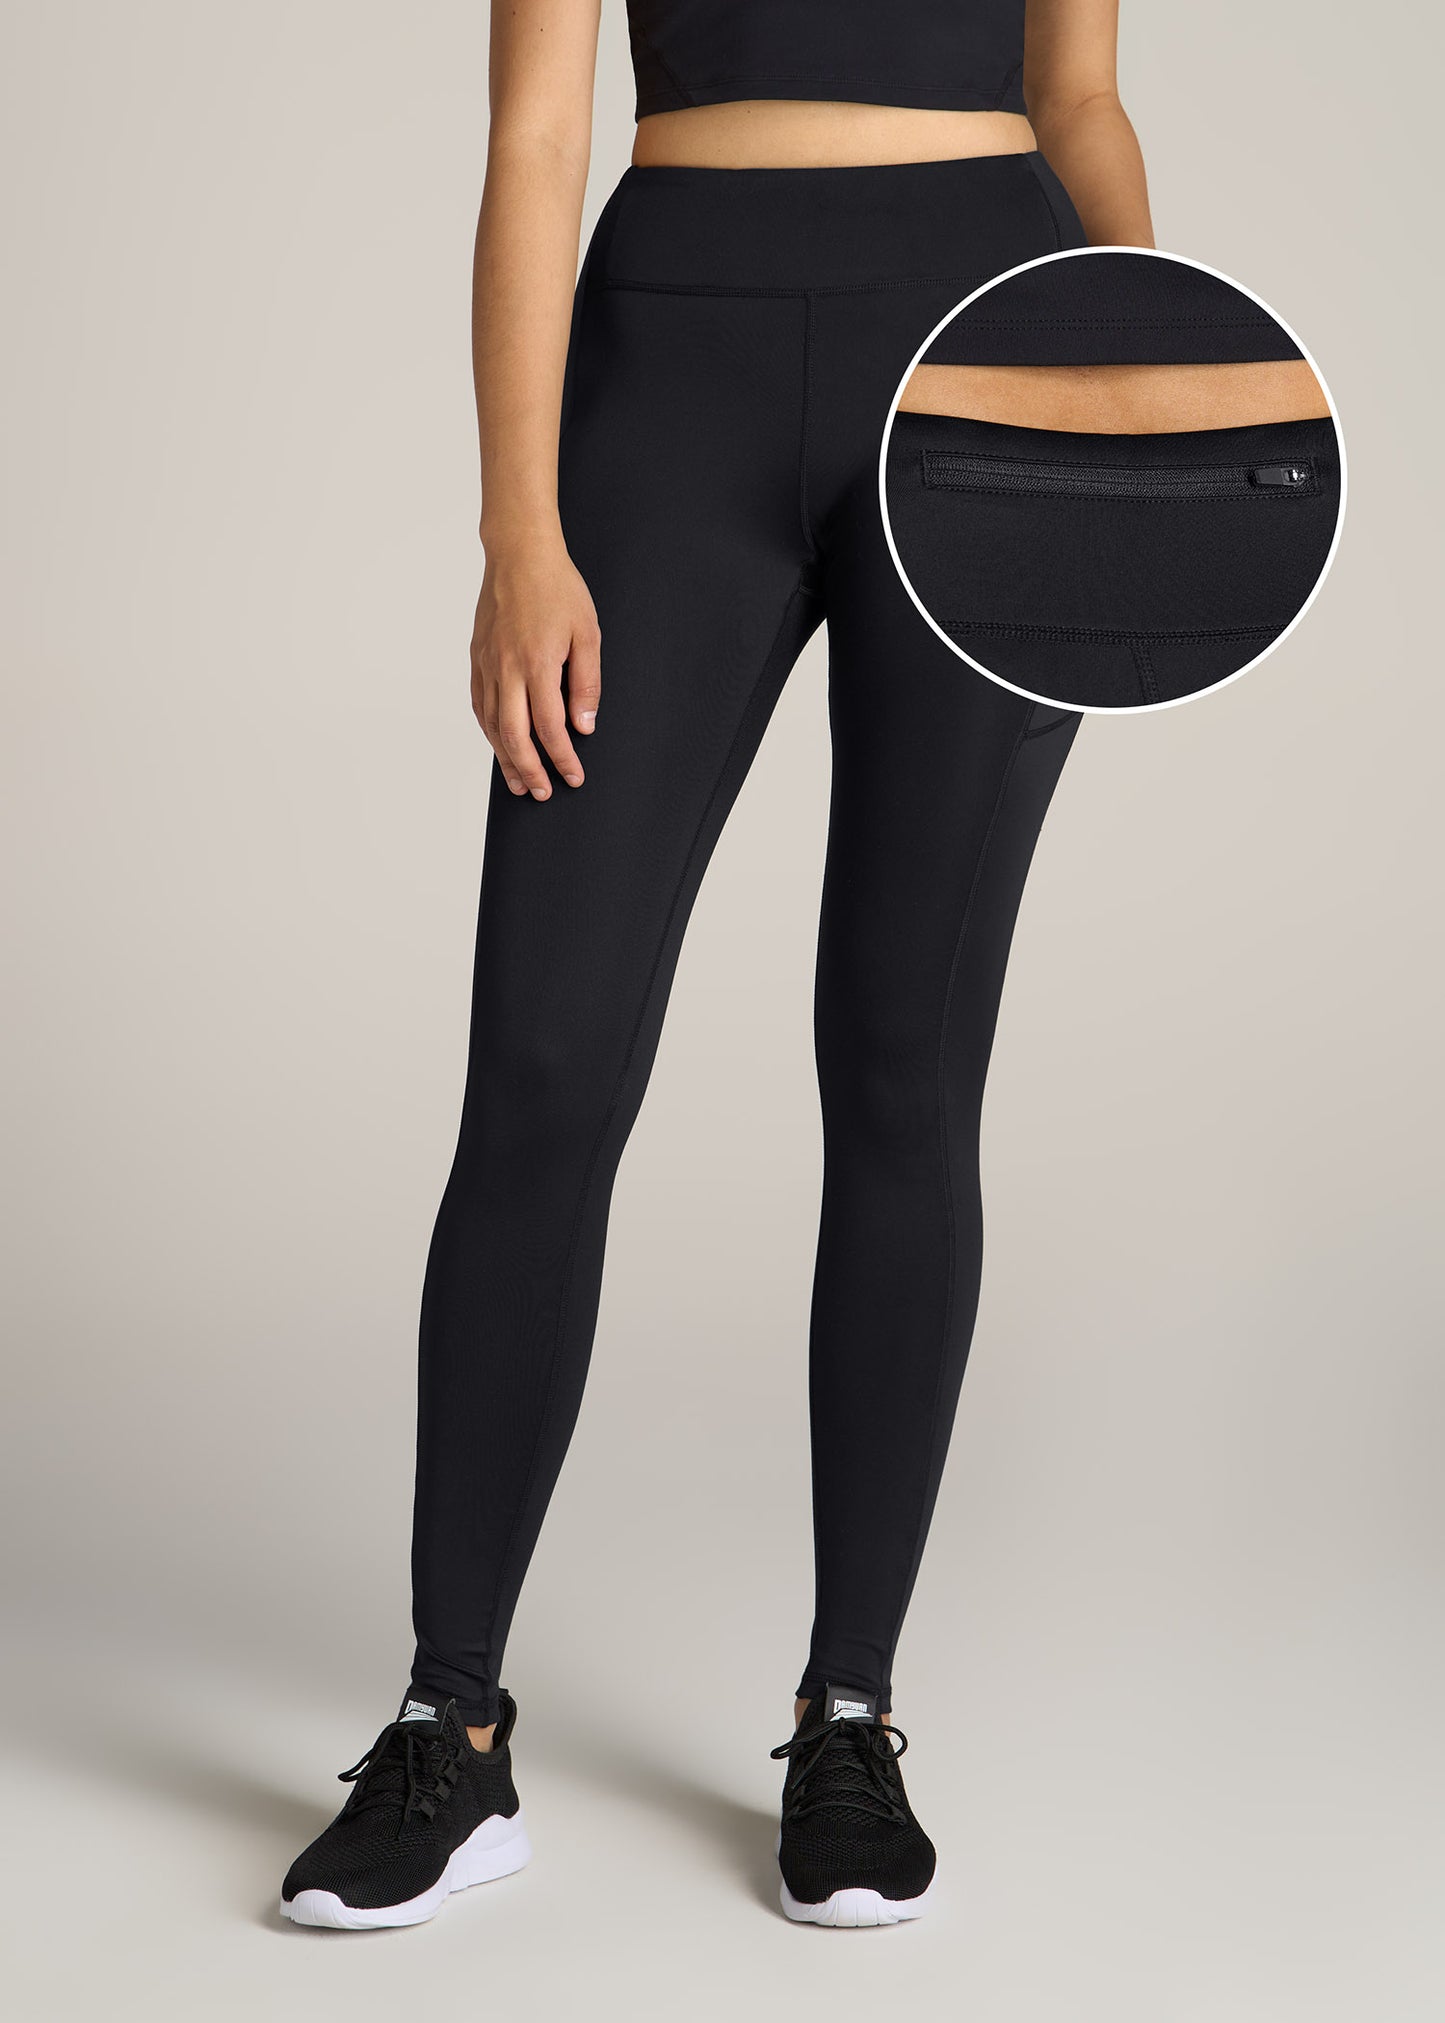 Women's Active Tall Leggings with Pockets in Black